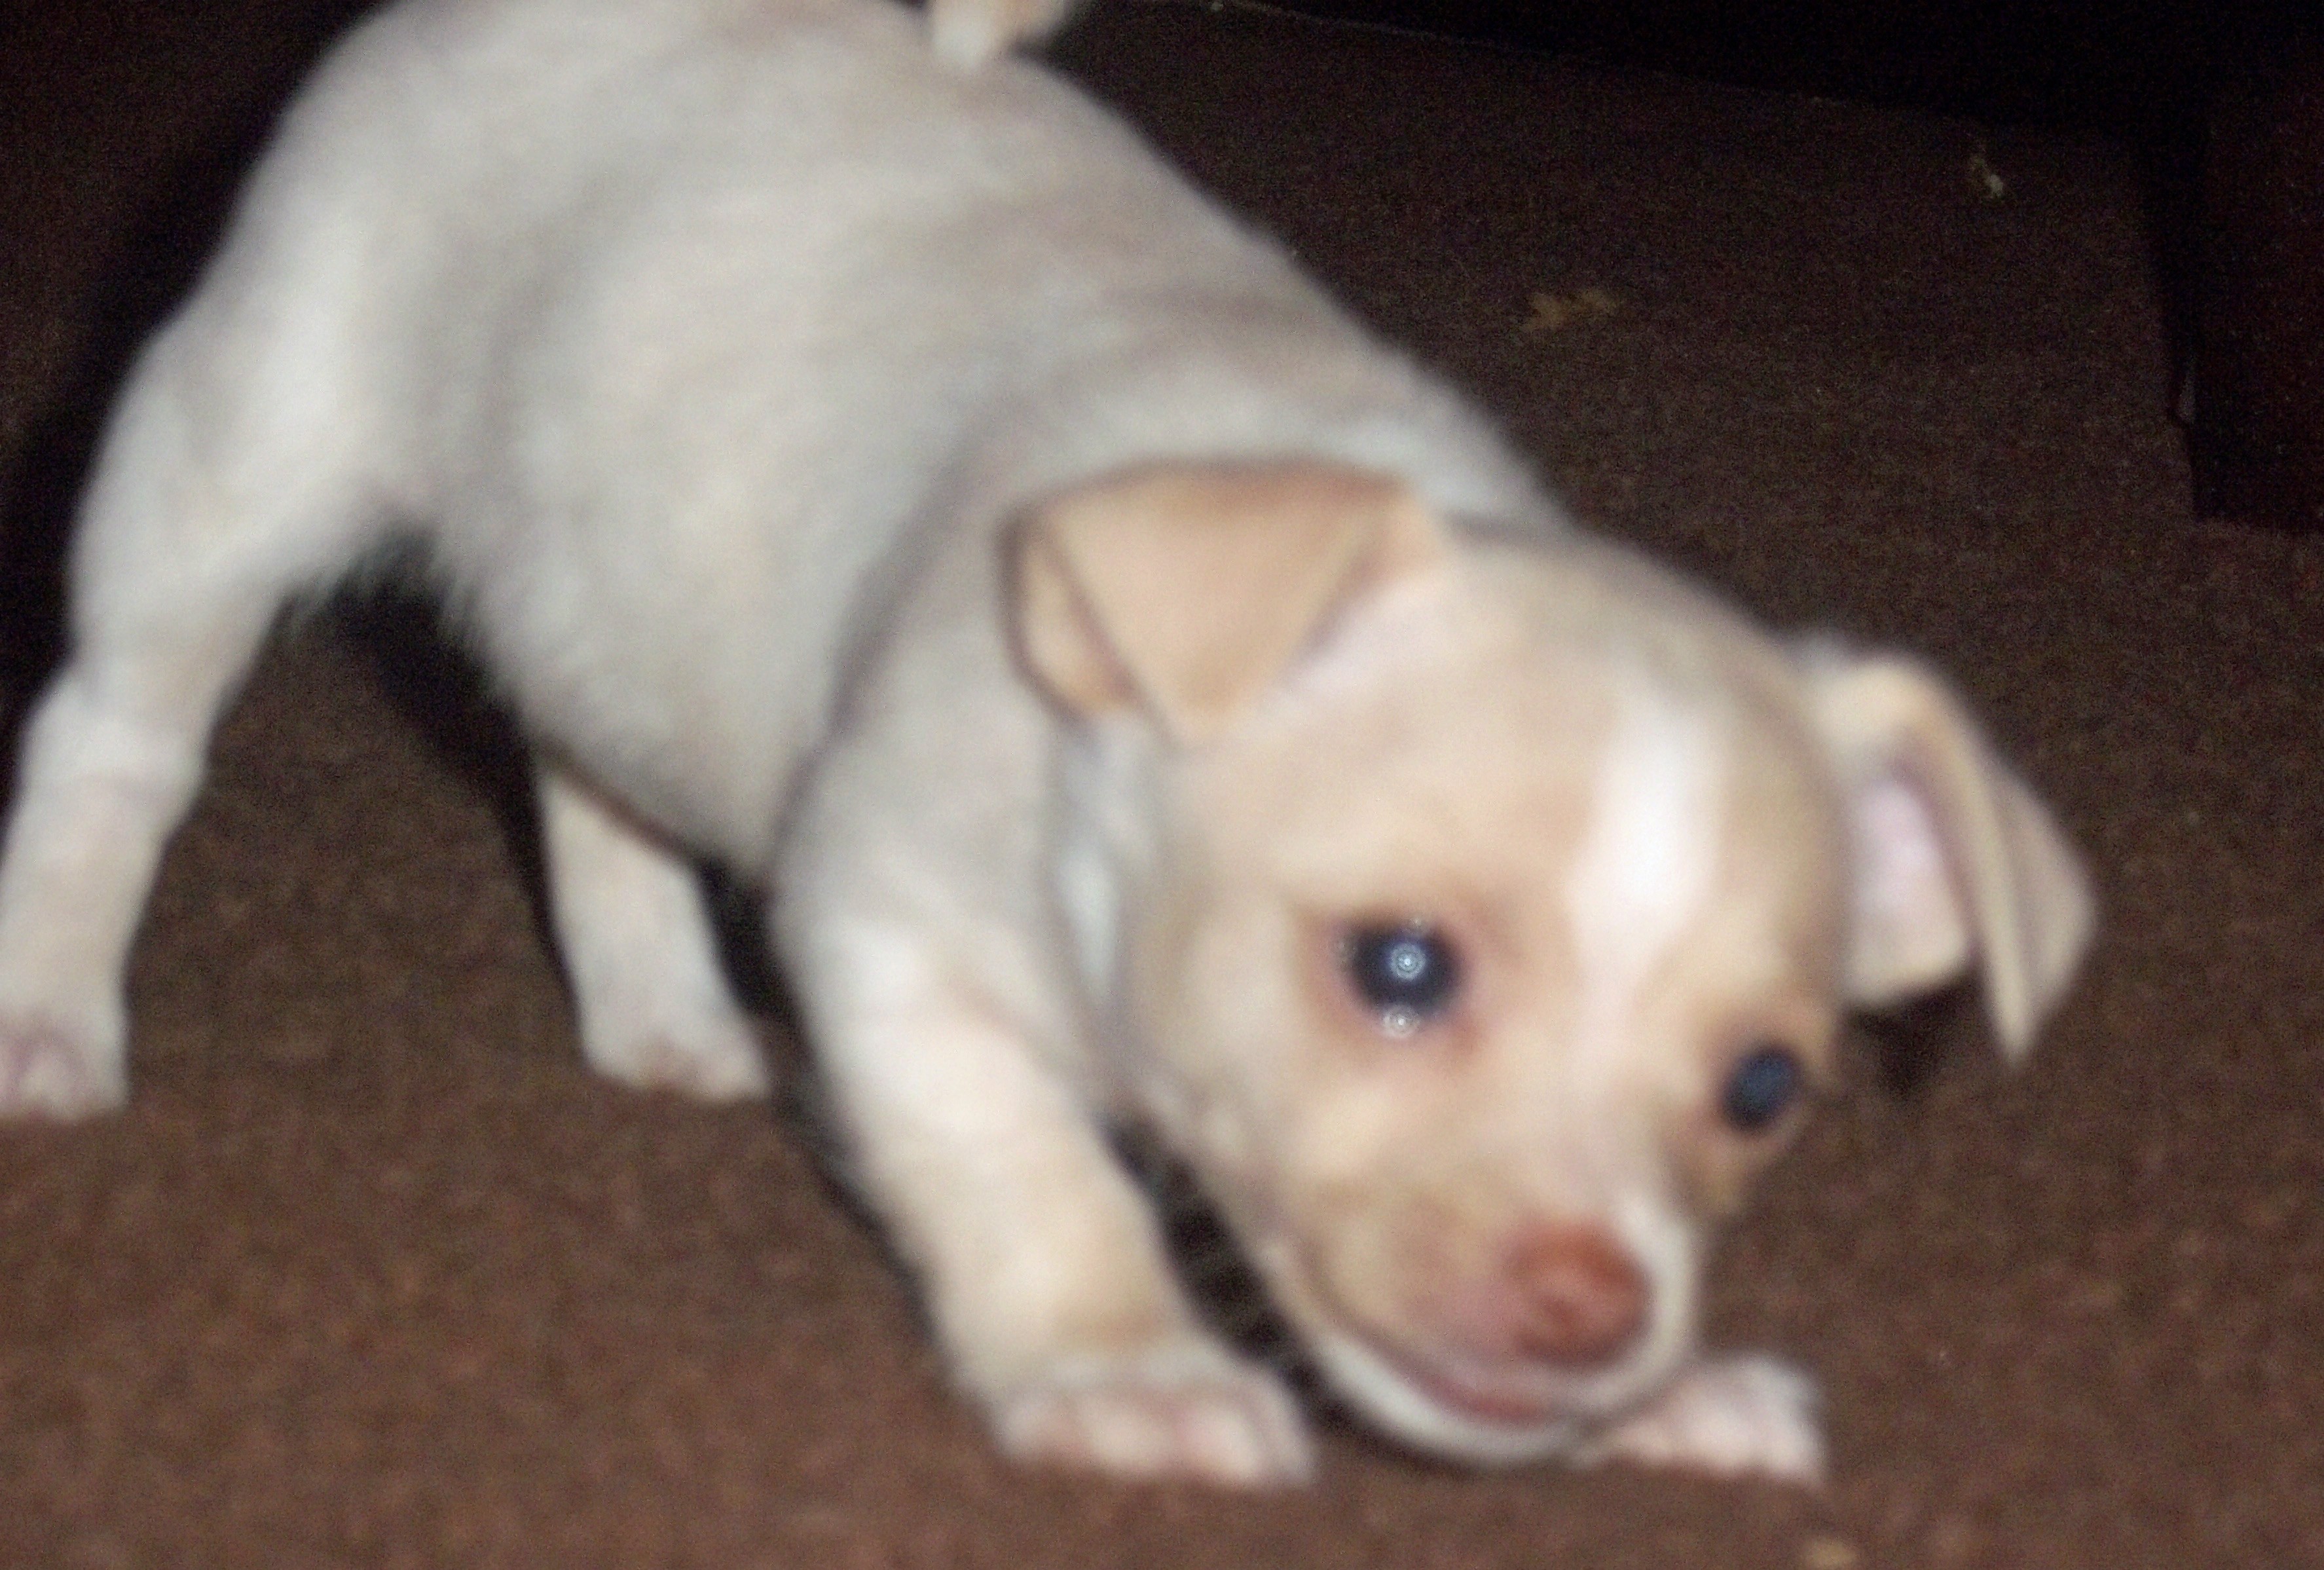 Immature puppy eyes are typically blue